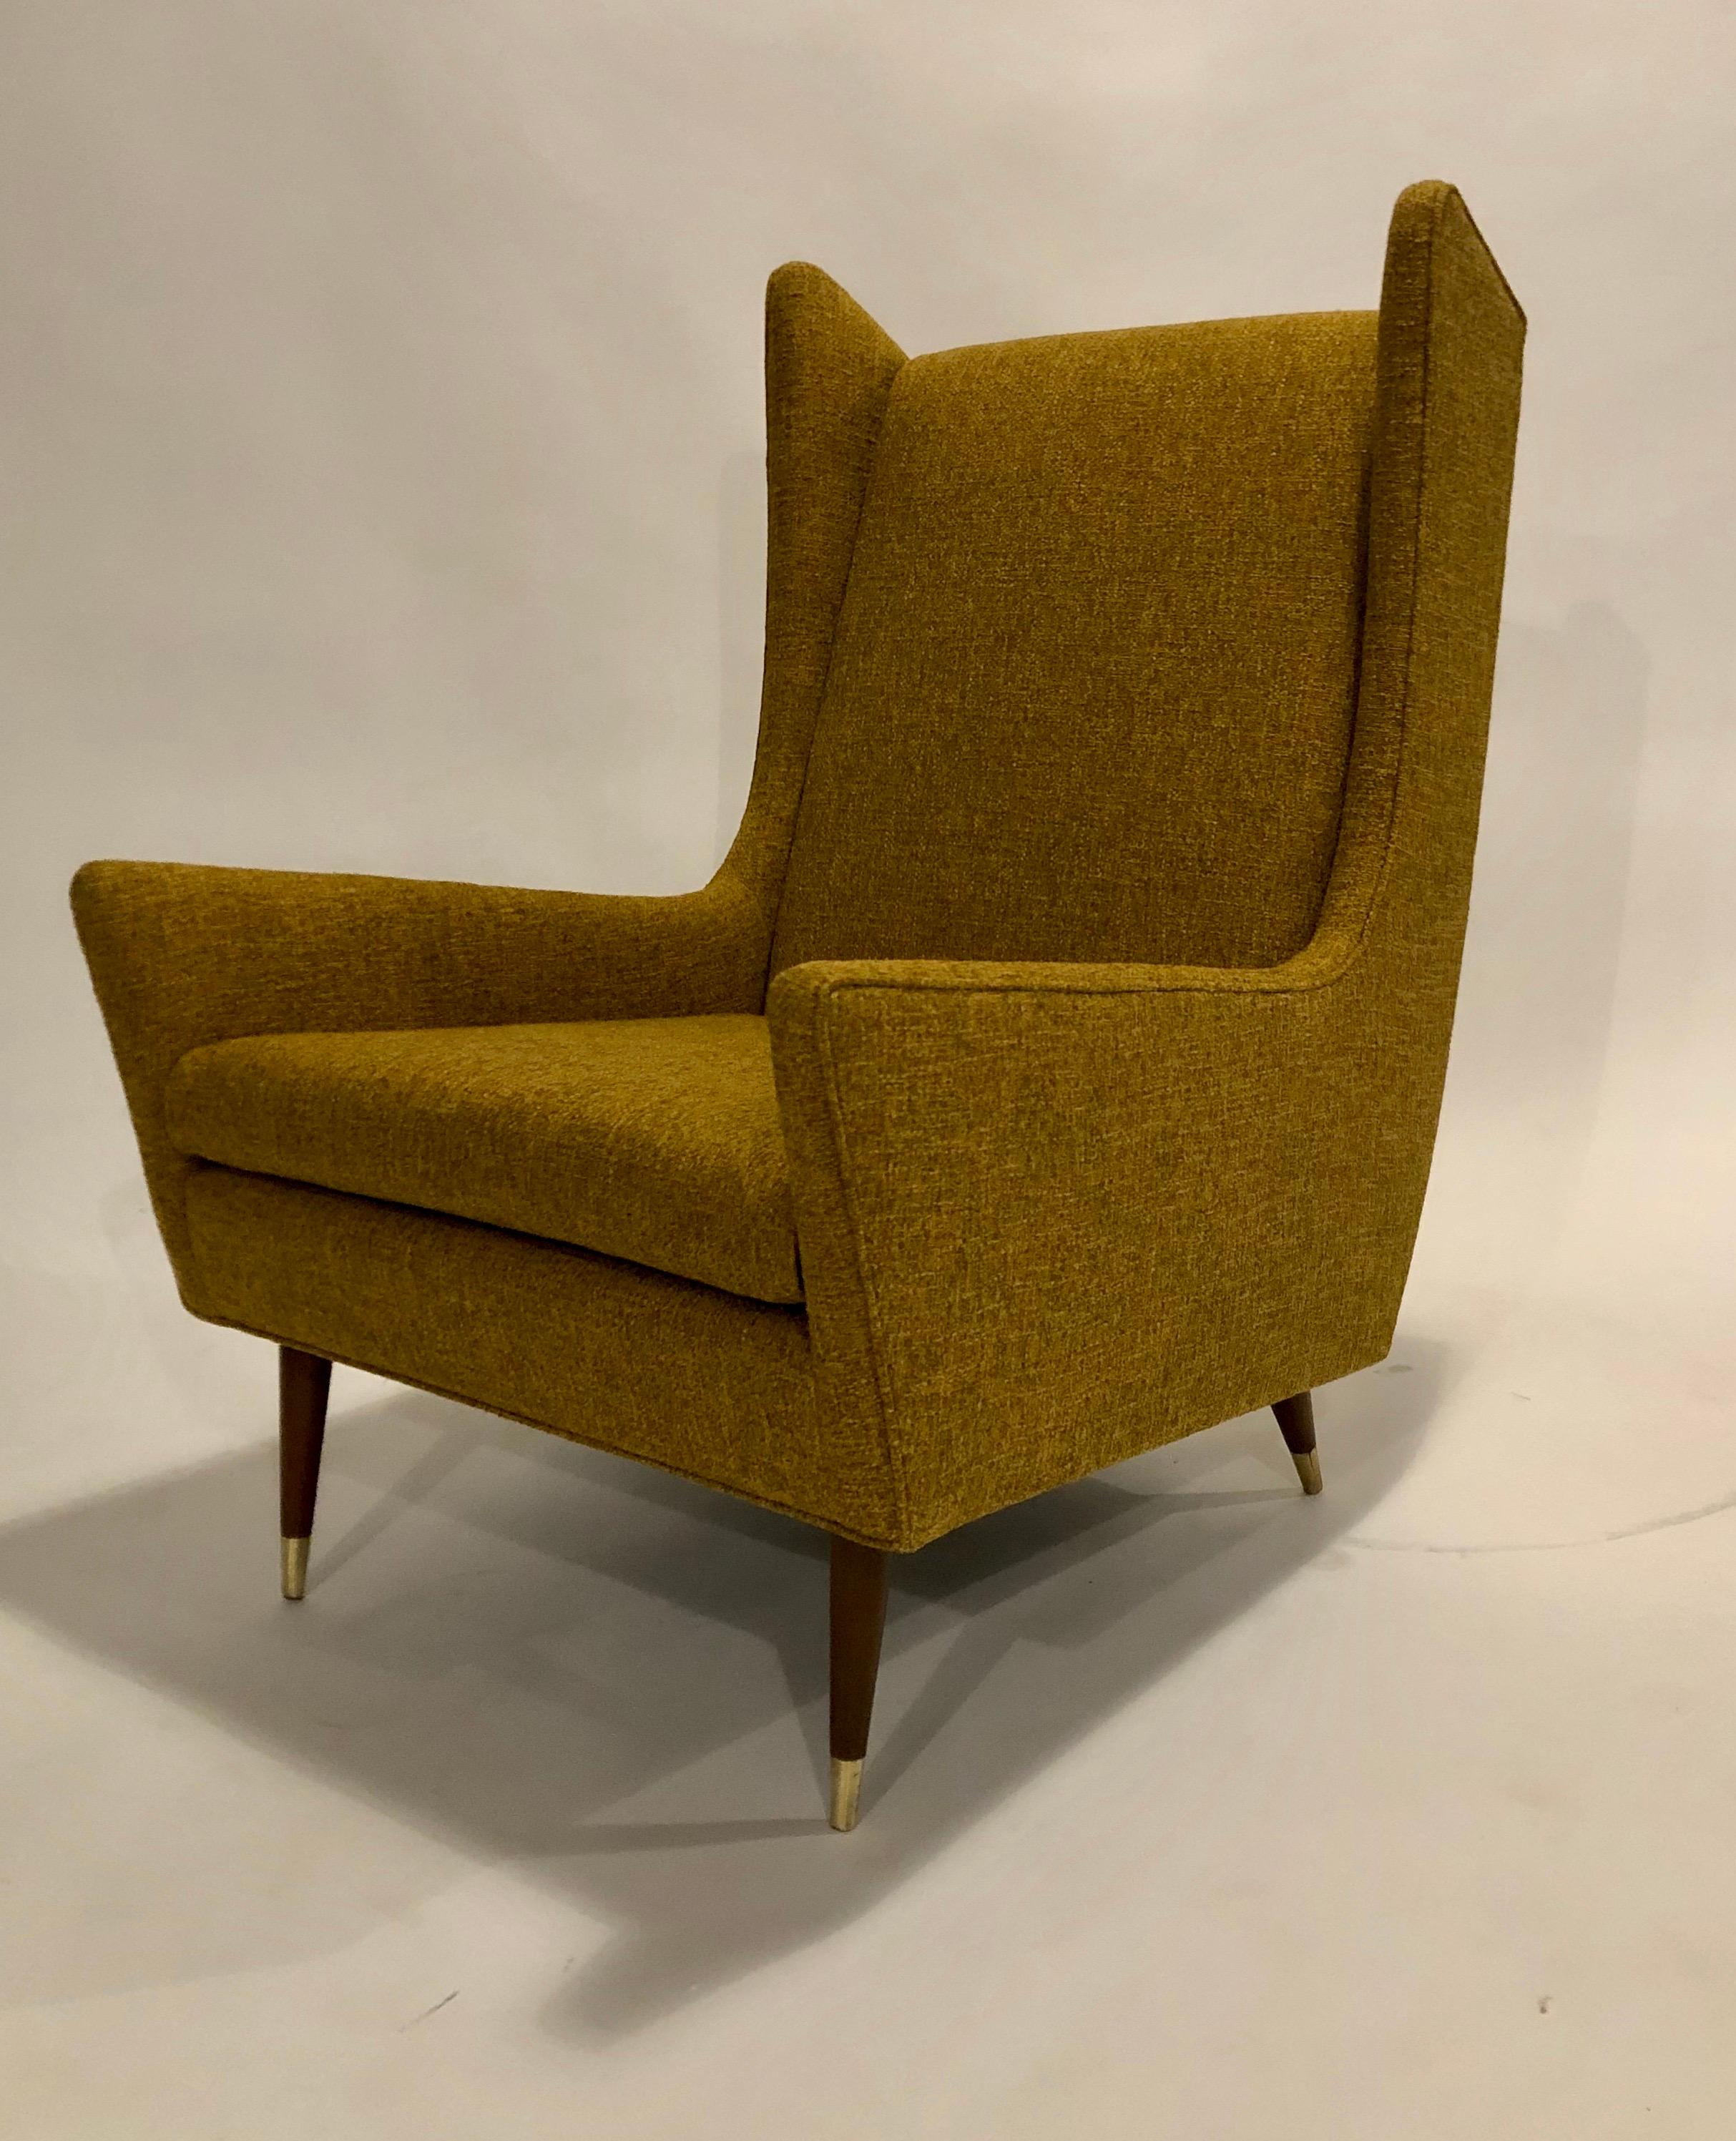 Mid-Century Modern wing chair by Selig newly upholstered in a gold weave WIND Exclusive Design fabric. All new cushions and restored wood and brass caps make this vintage chair showroom condition. Attributed to IB Kofod Larsen.